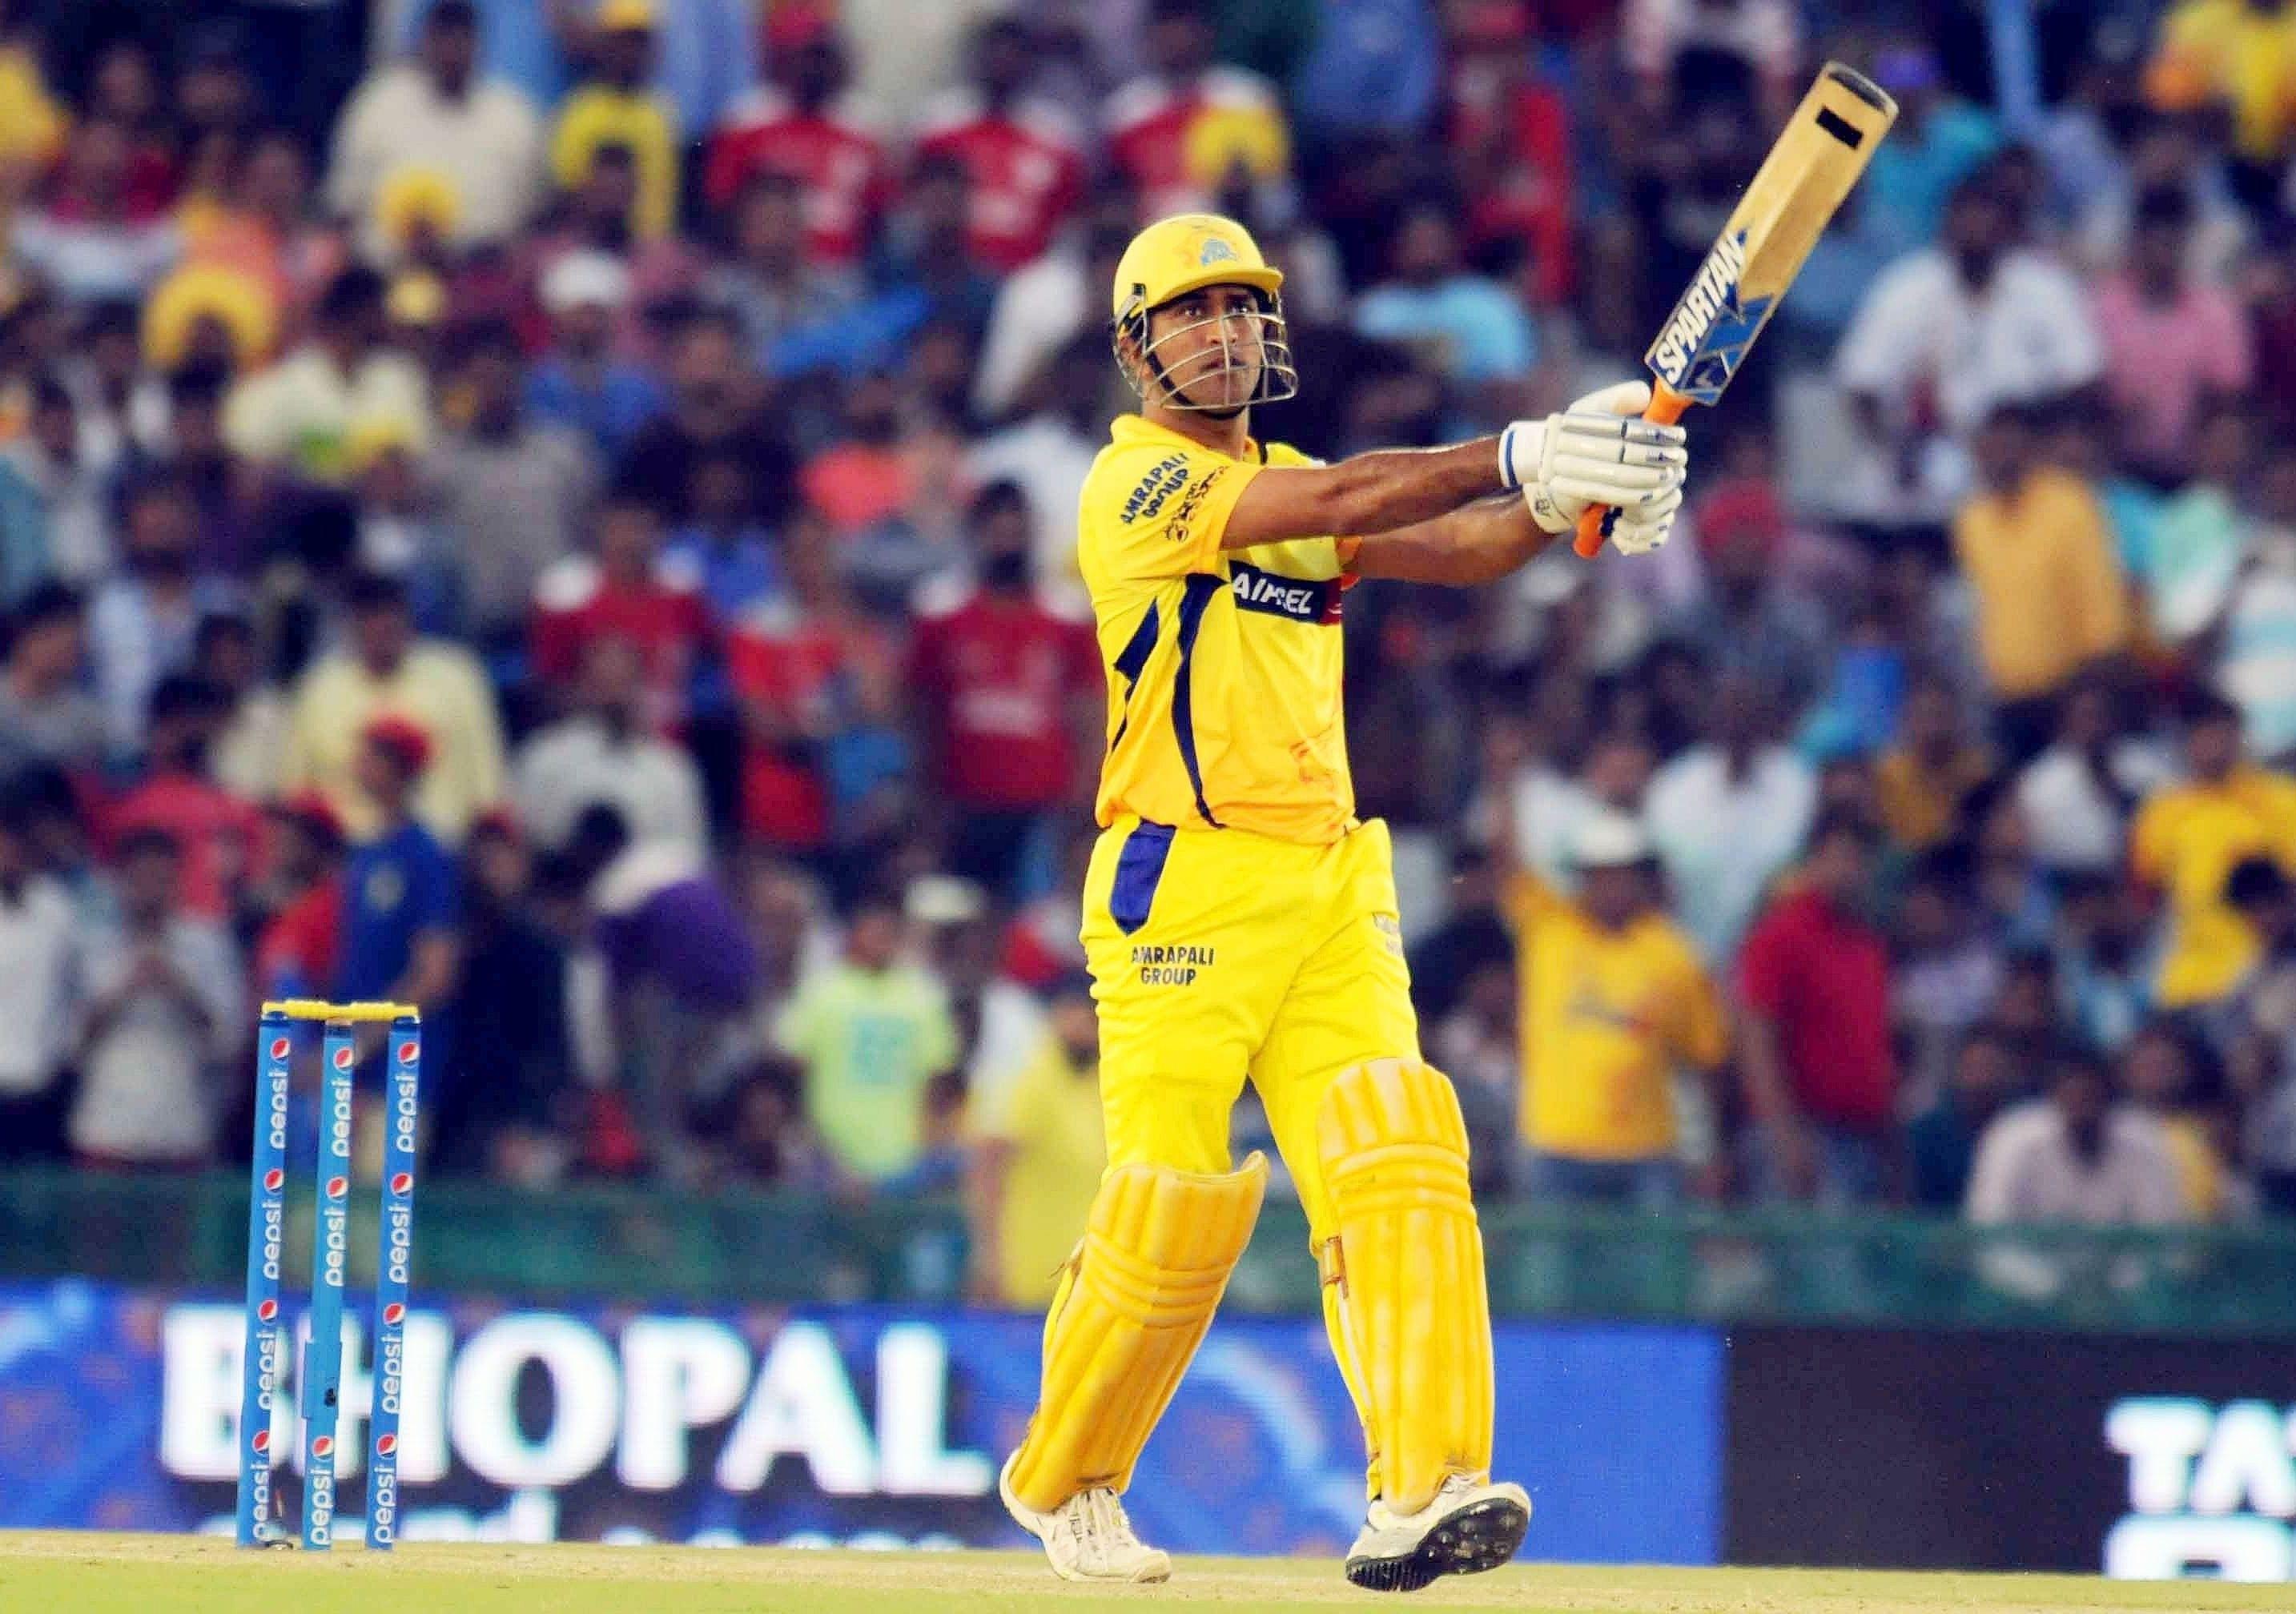 MS Dhoni in CSK IPL Match Wallpapers